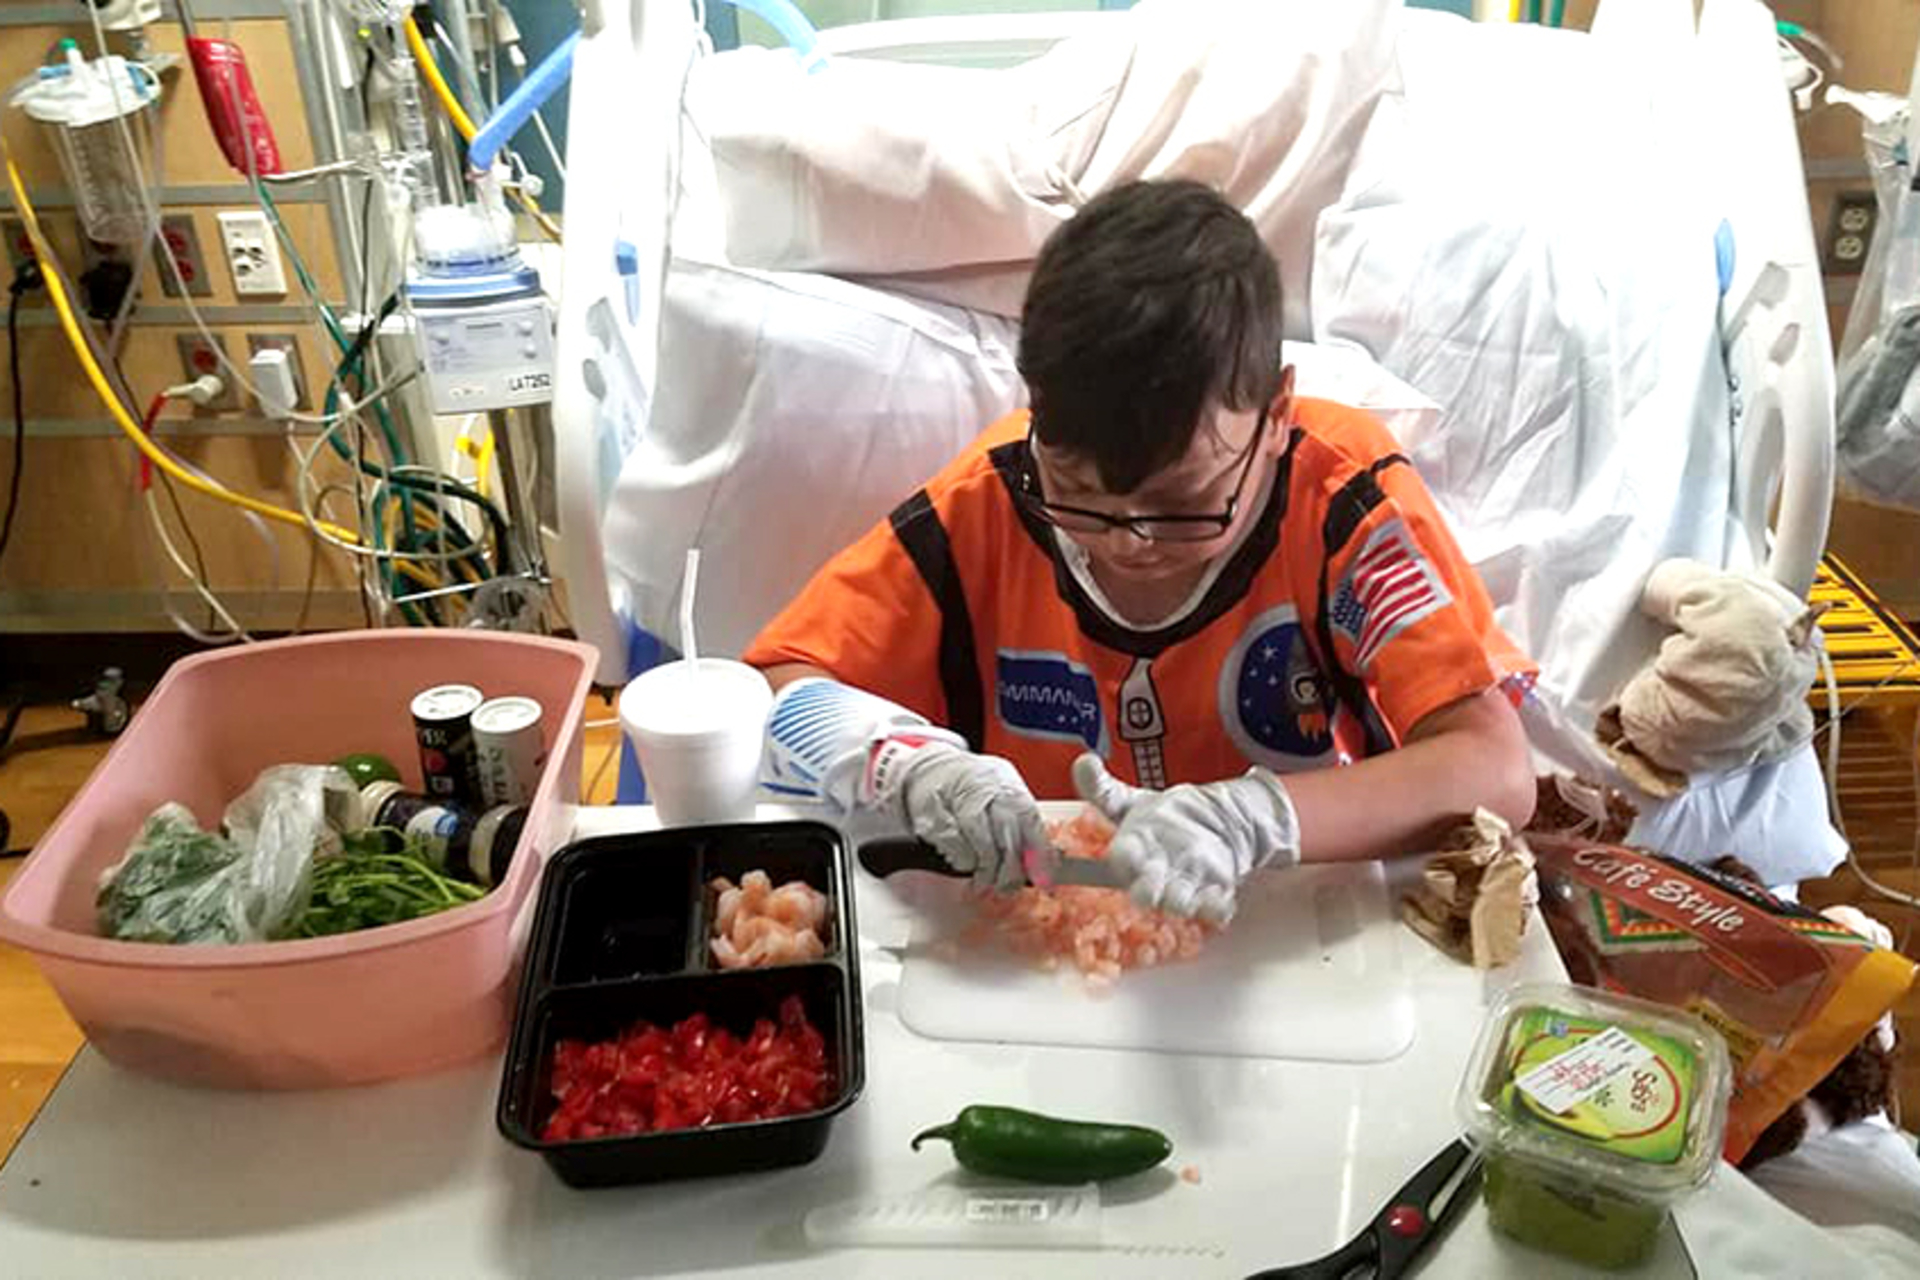 Juan, in his Starlight gown, cooking while in the hospital